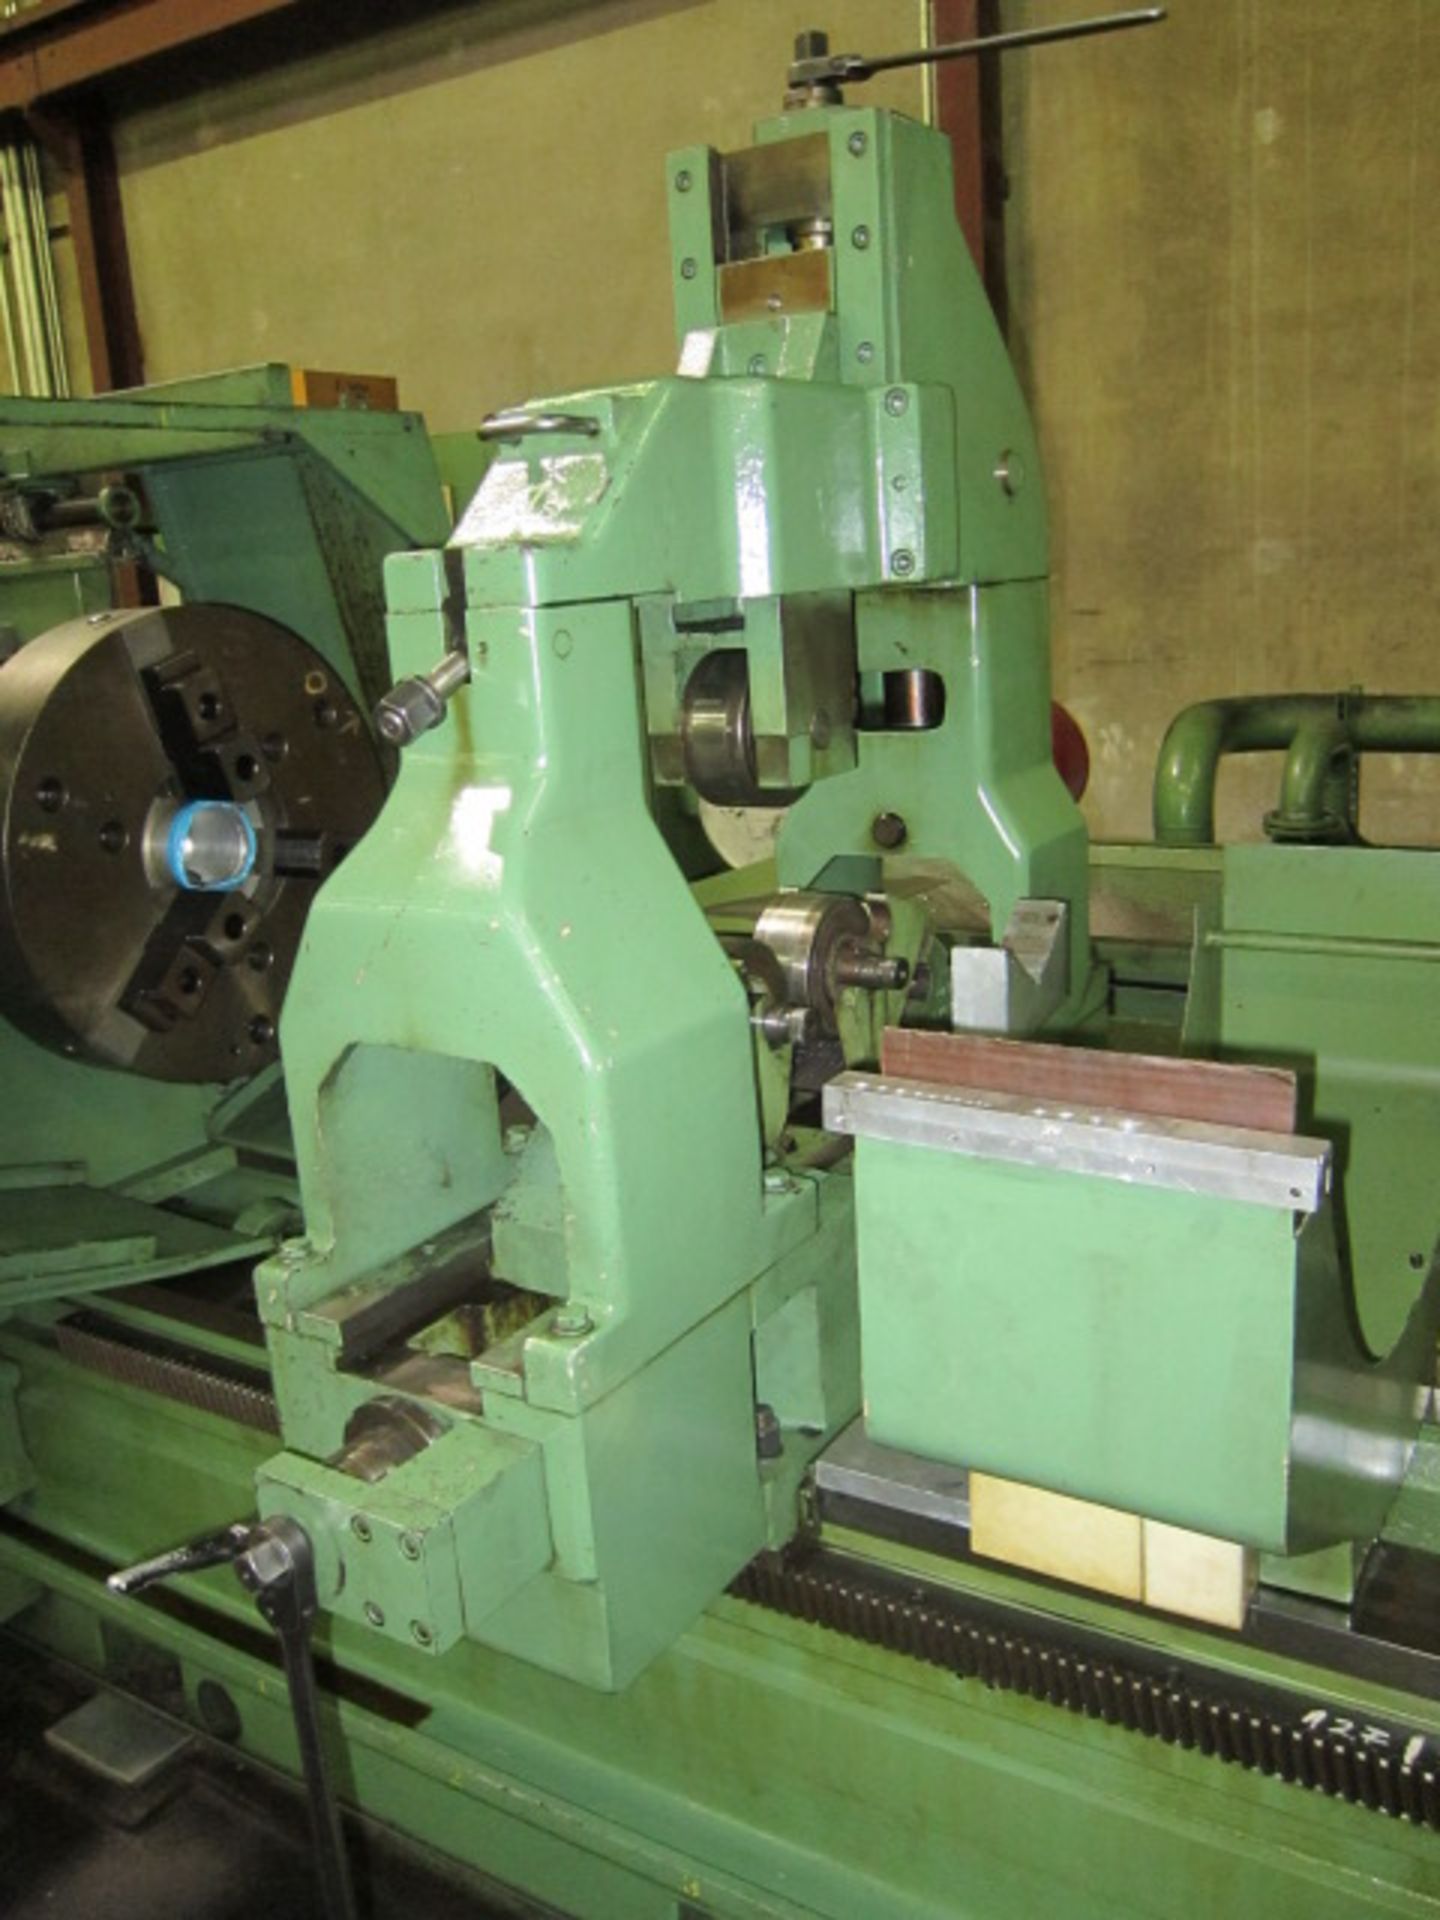 COUNTER ROTATING DEEP HOLE BORING MACHINE, WOHLENBERG MDL. PB2-1000 X 11M, new 1995, 39.37” sw. over - Image 6 of 38